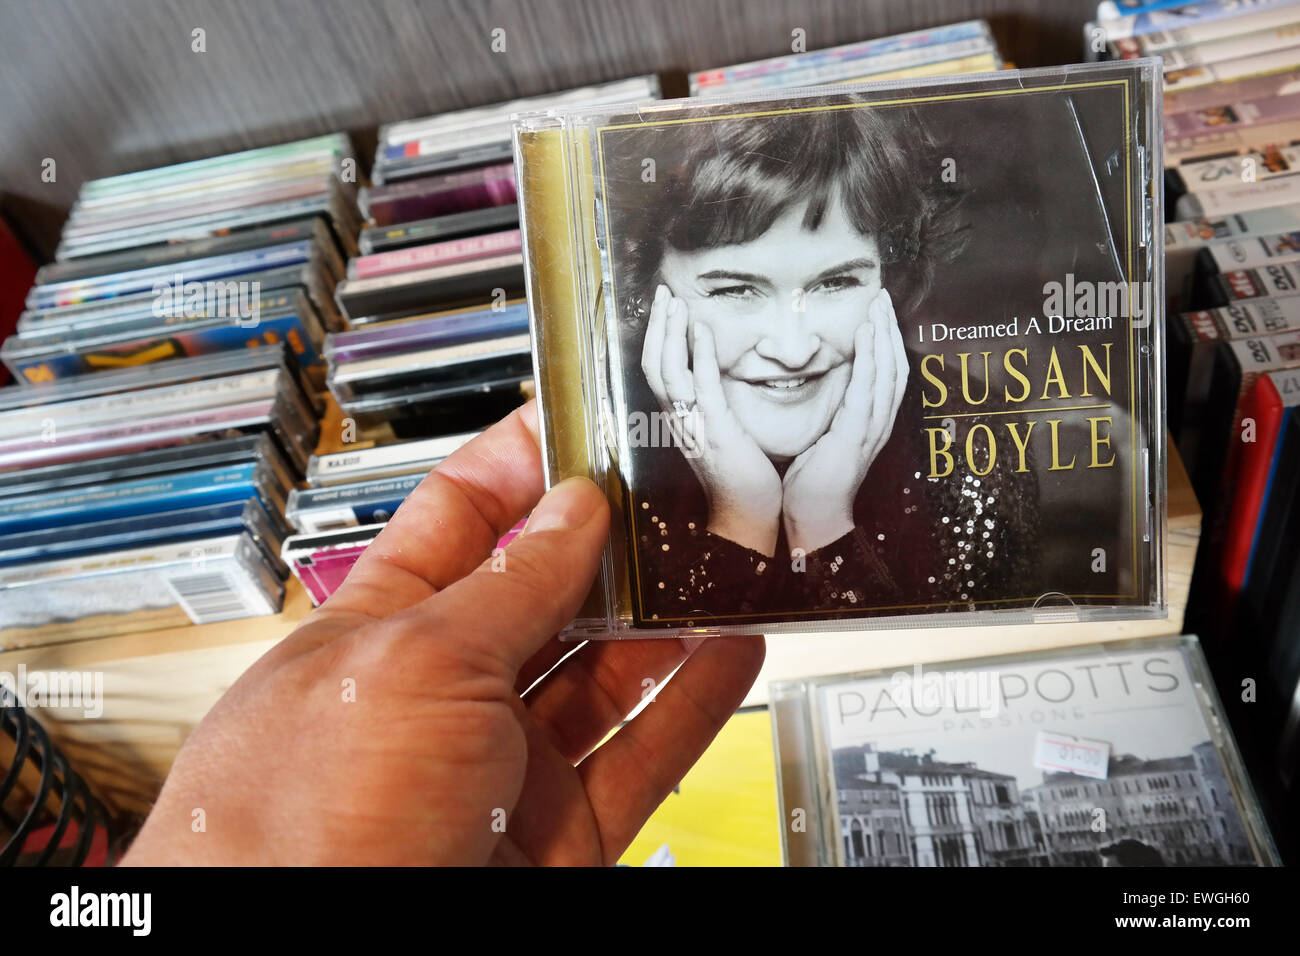 THE NETHERLANDS - JULY 2015: Compact disc of the Scottish singer Susan Boyle in a second hand store. Stock Photo